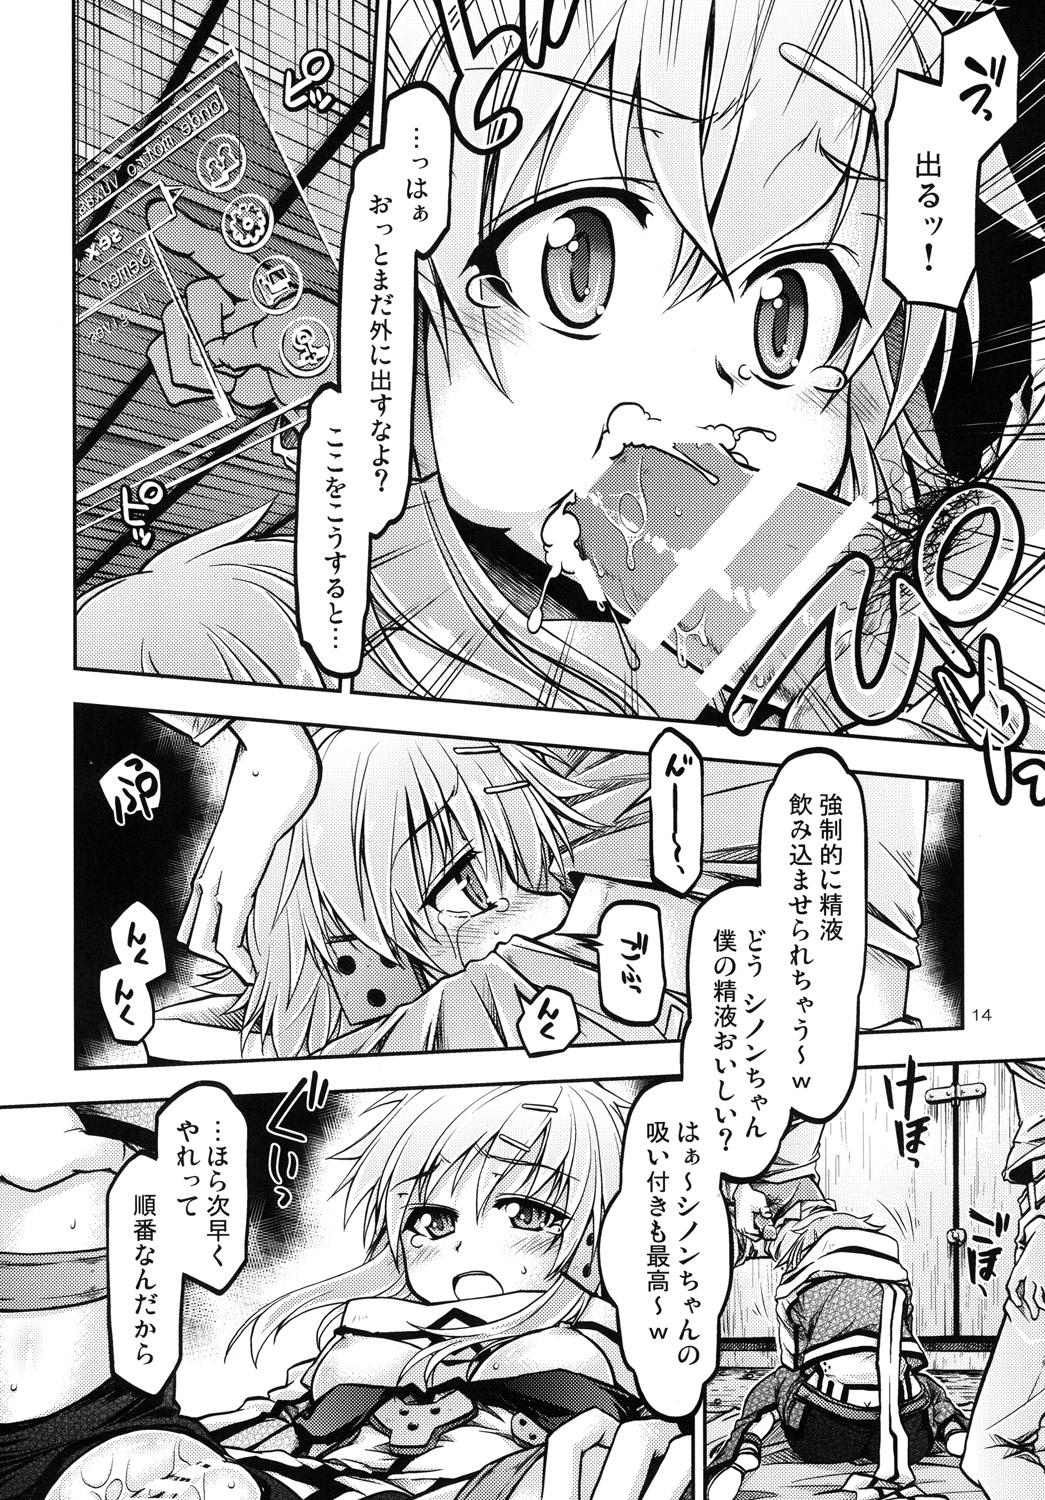 Squirting Gspot - Sword art online 3some - Page 13